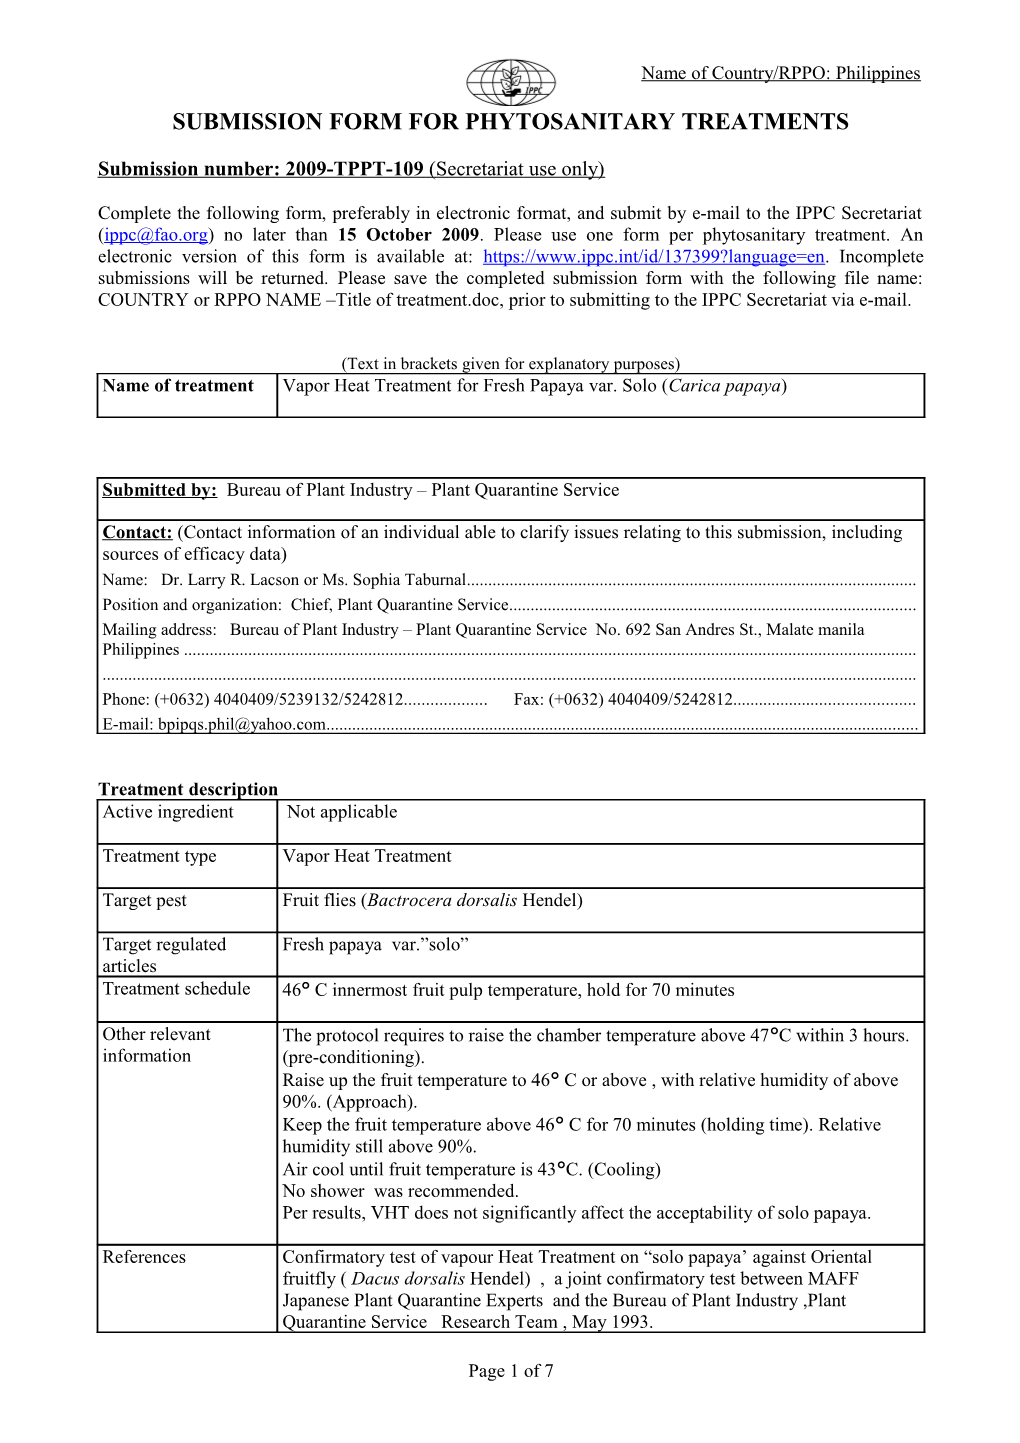 Submission Form for Phytosanitary Treatments